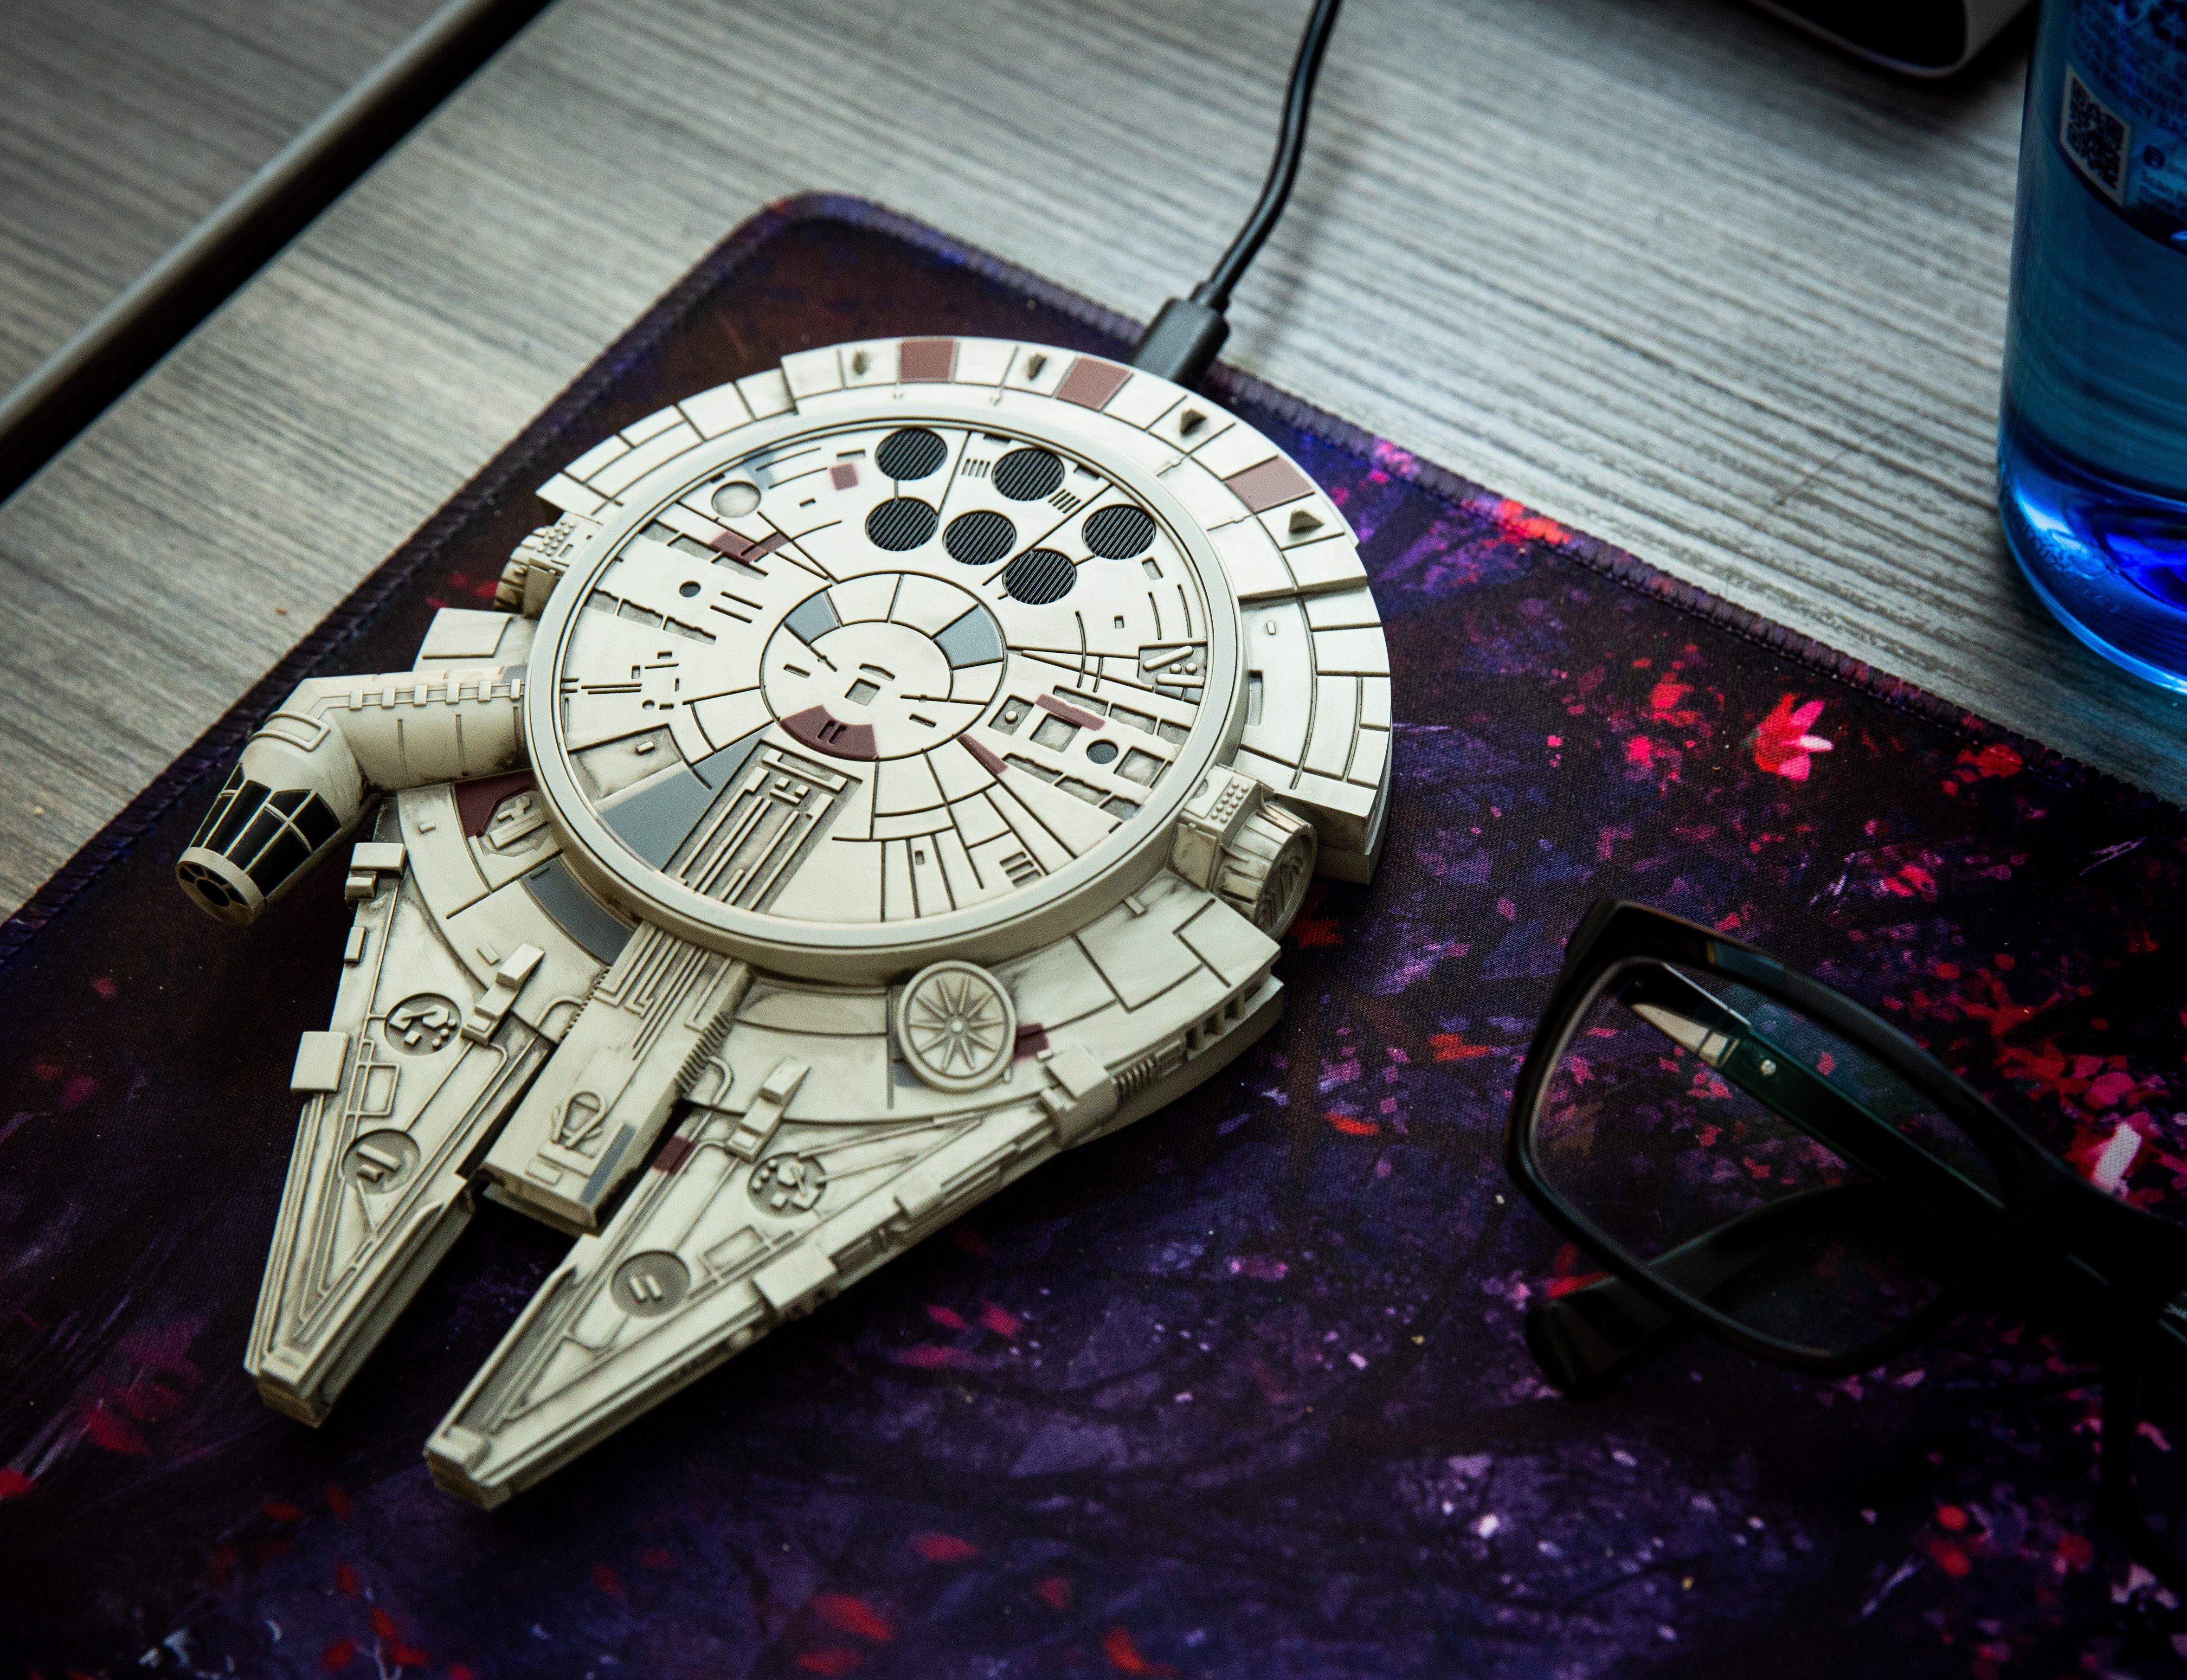 Geeknet Star Wars Millennium Falcon Wireless Charger with AC Adapter GameStop Exclusive